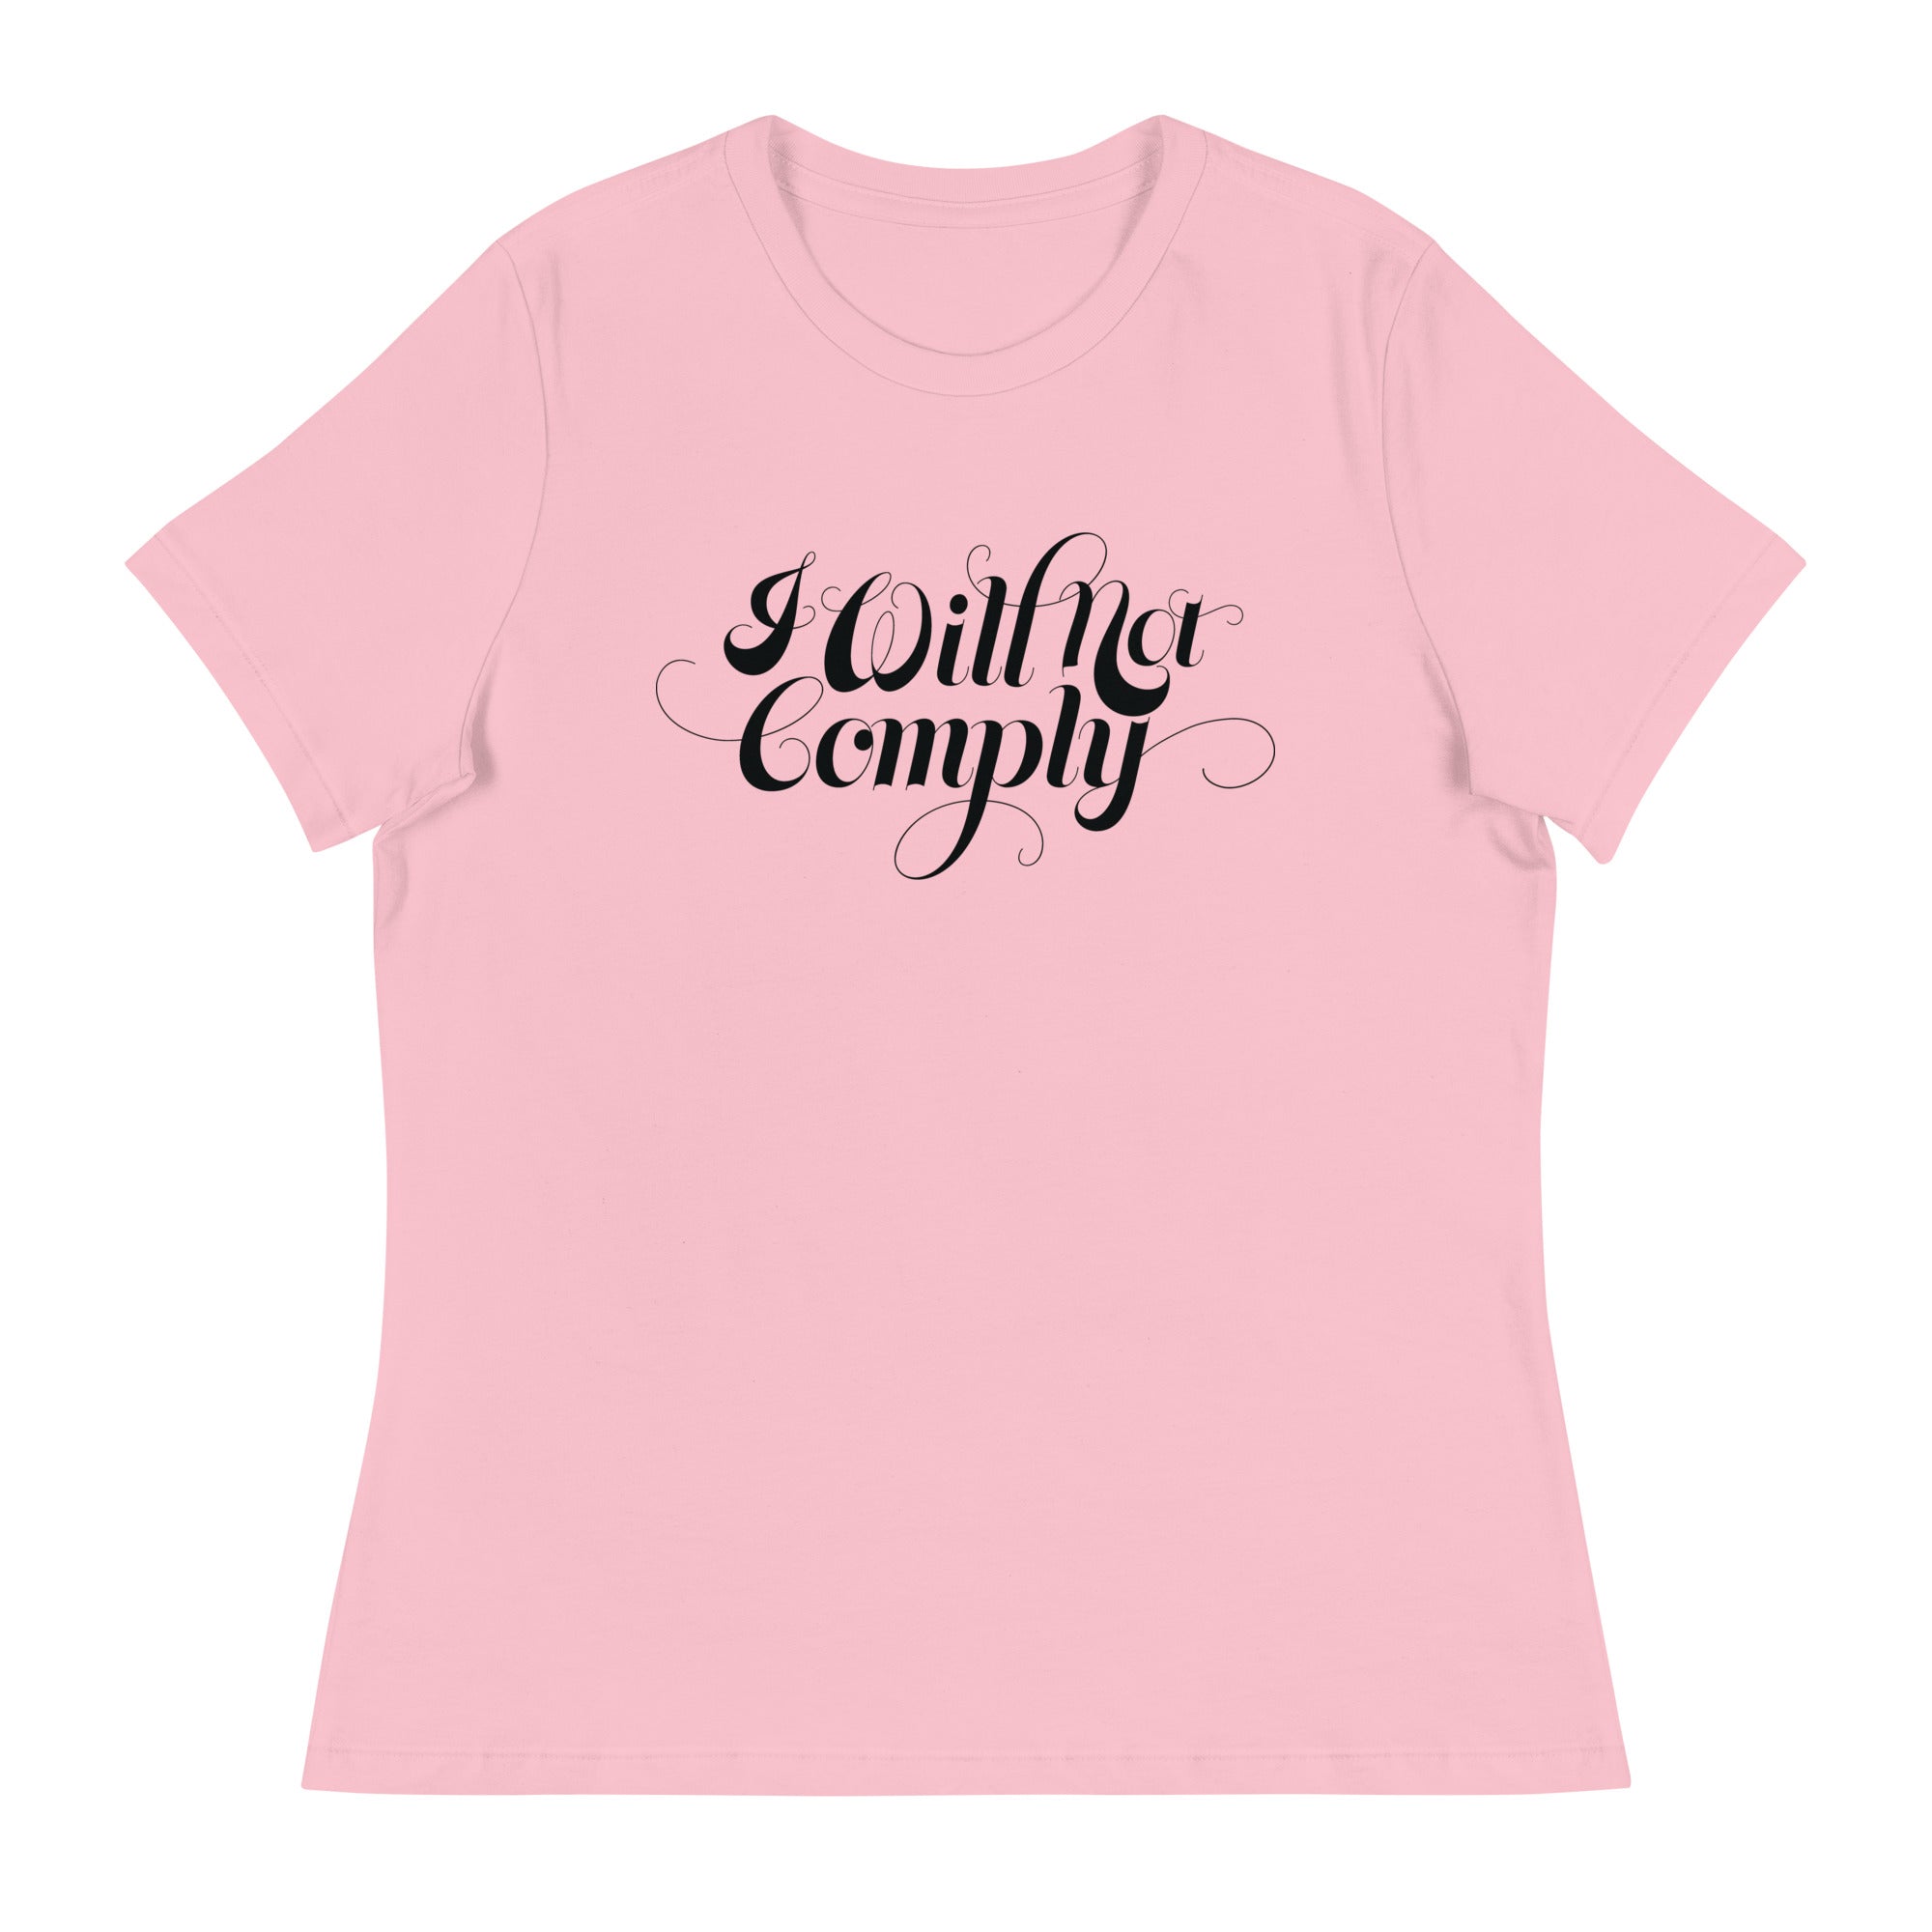 I Will Not Comply Women's Relaxed T-Shirt